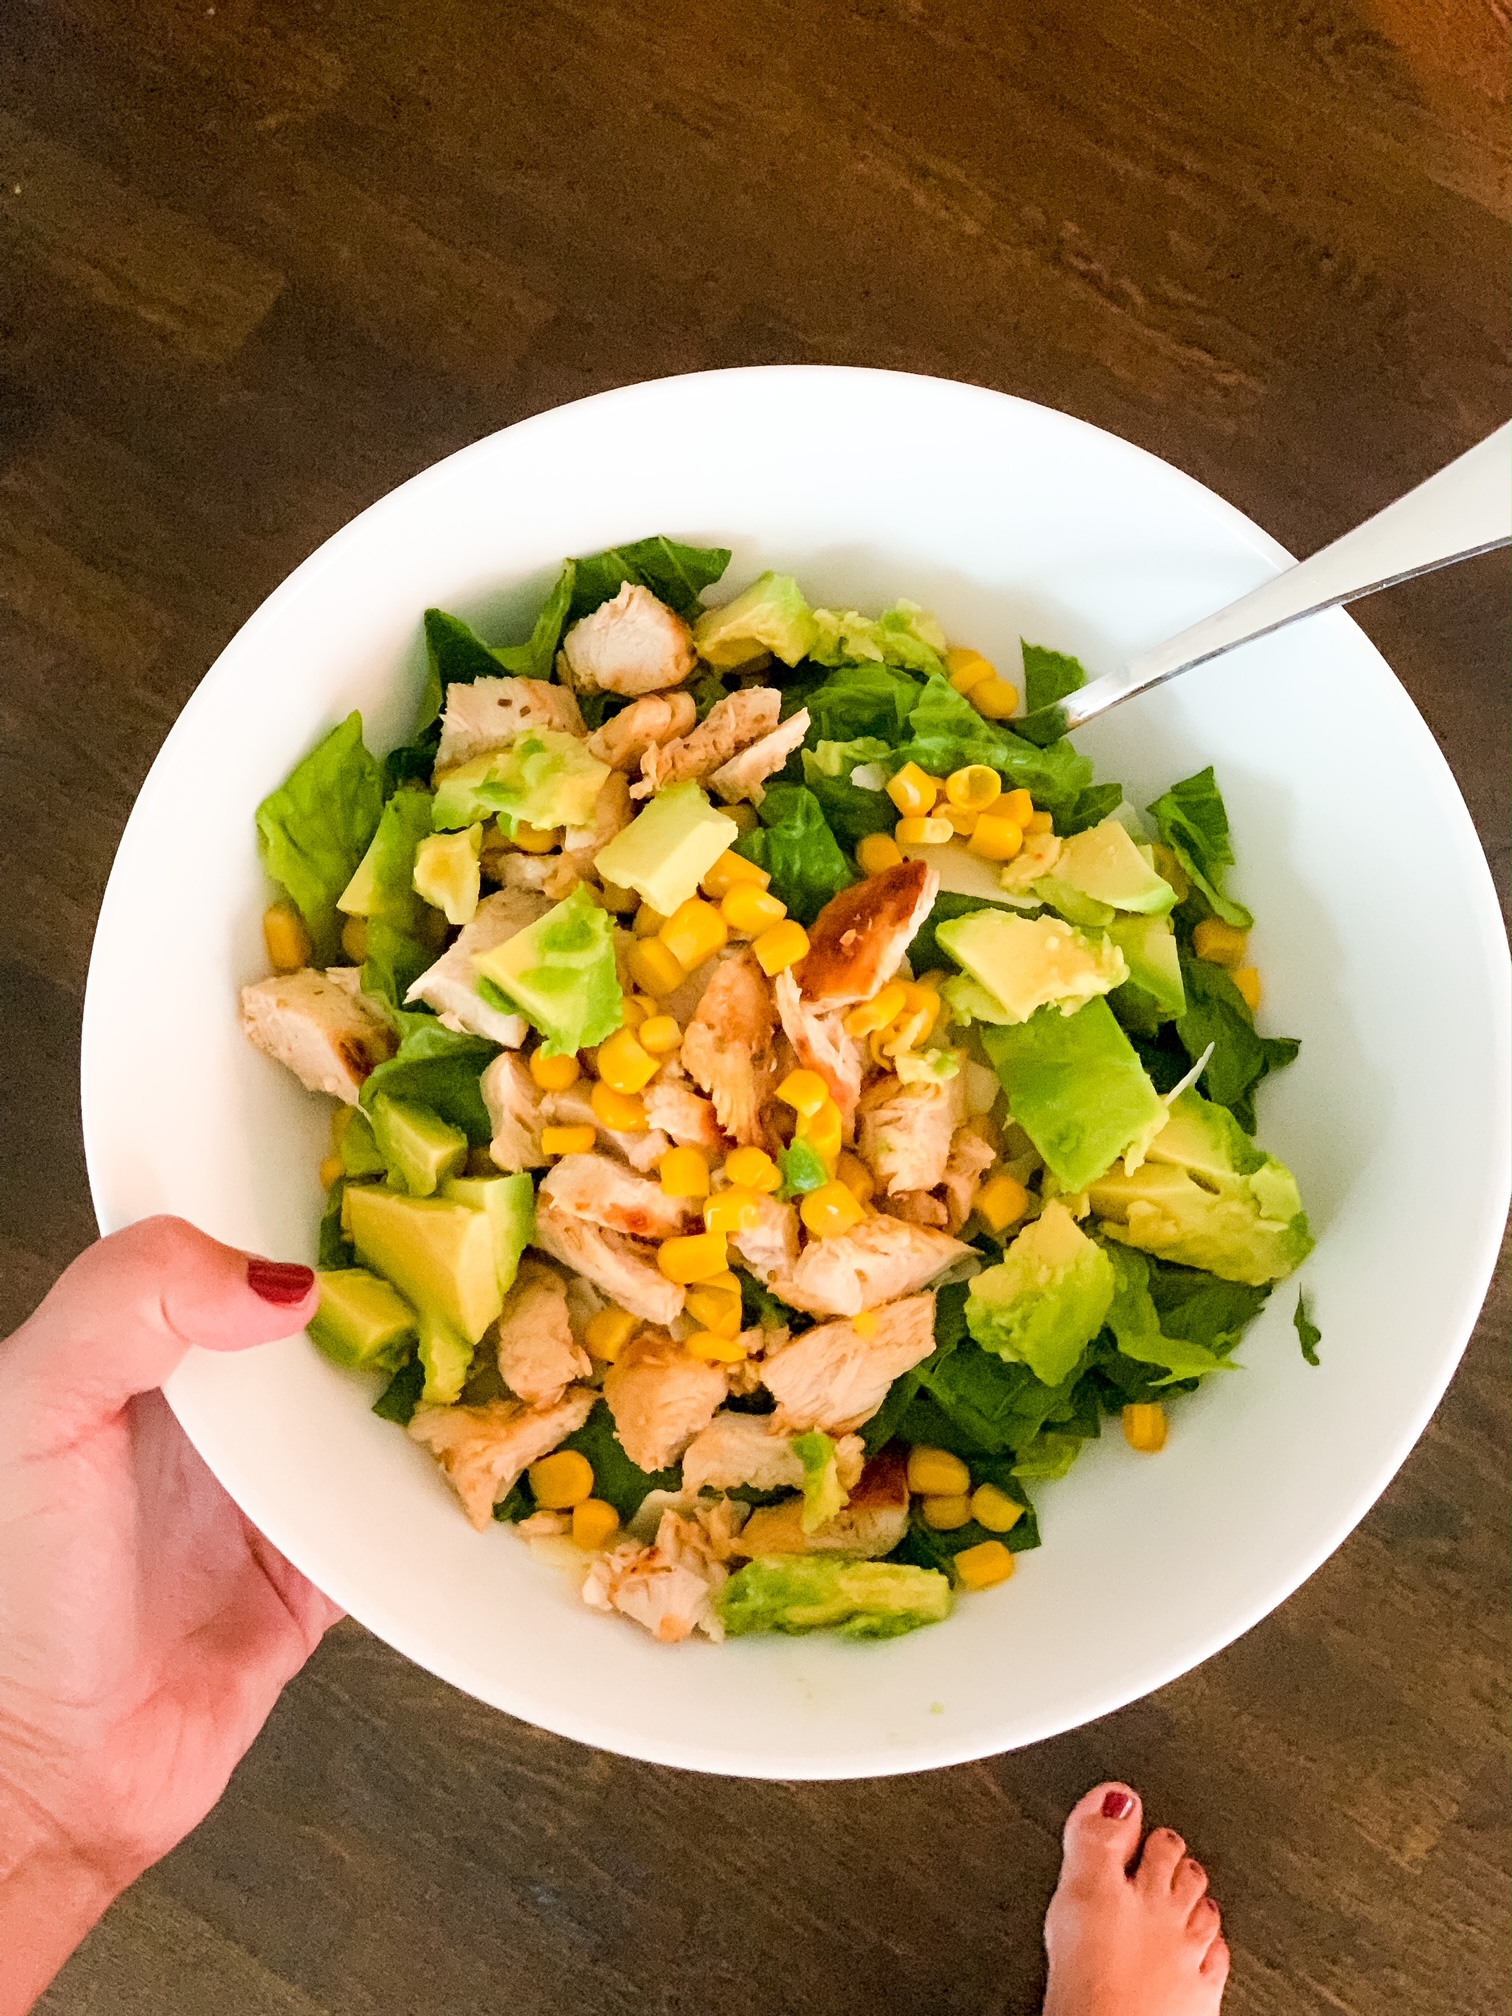 example of lunch salads you can make at home